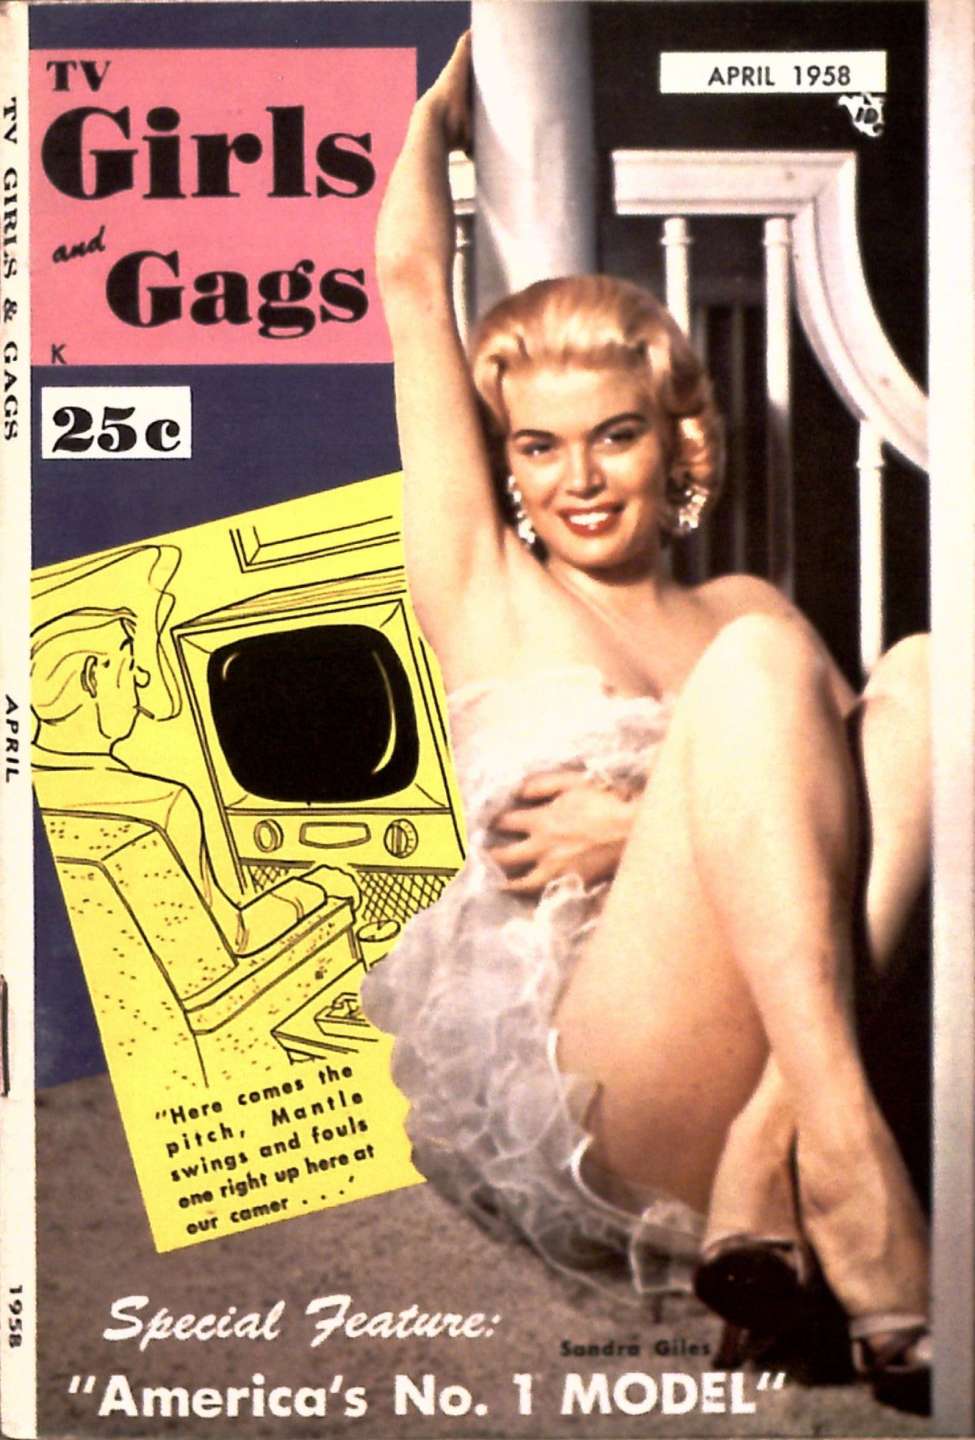 Book Cover For TV Girls and Gags v5 1